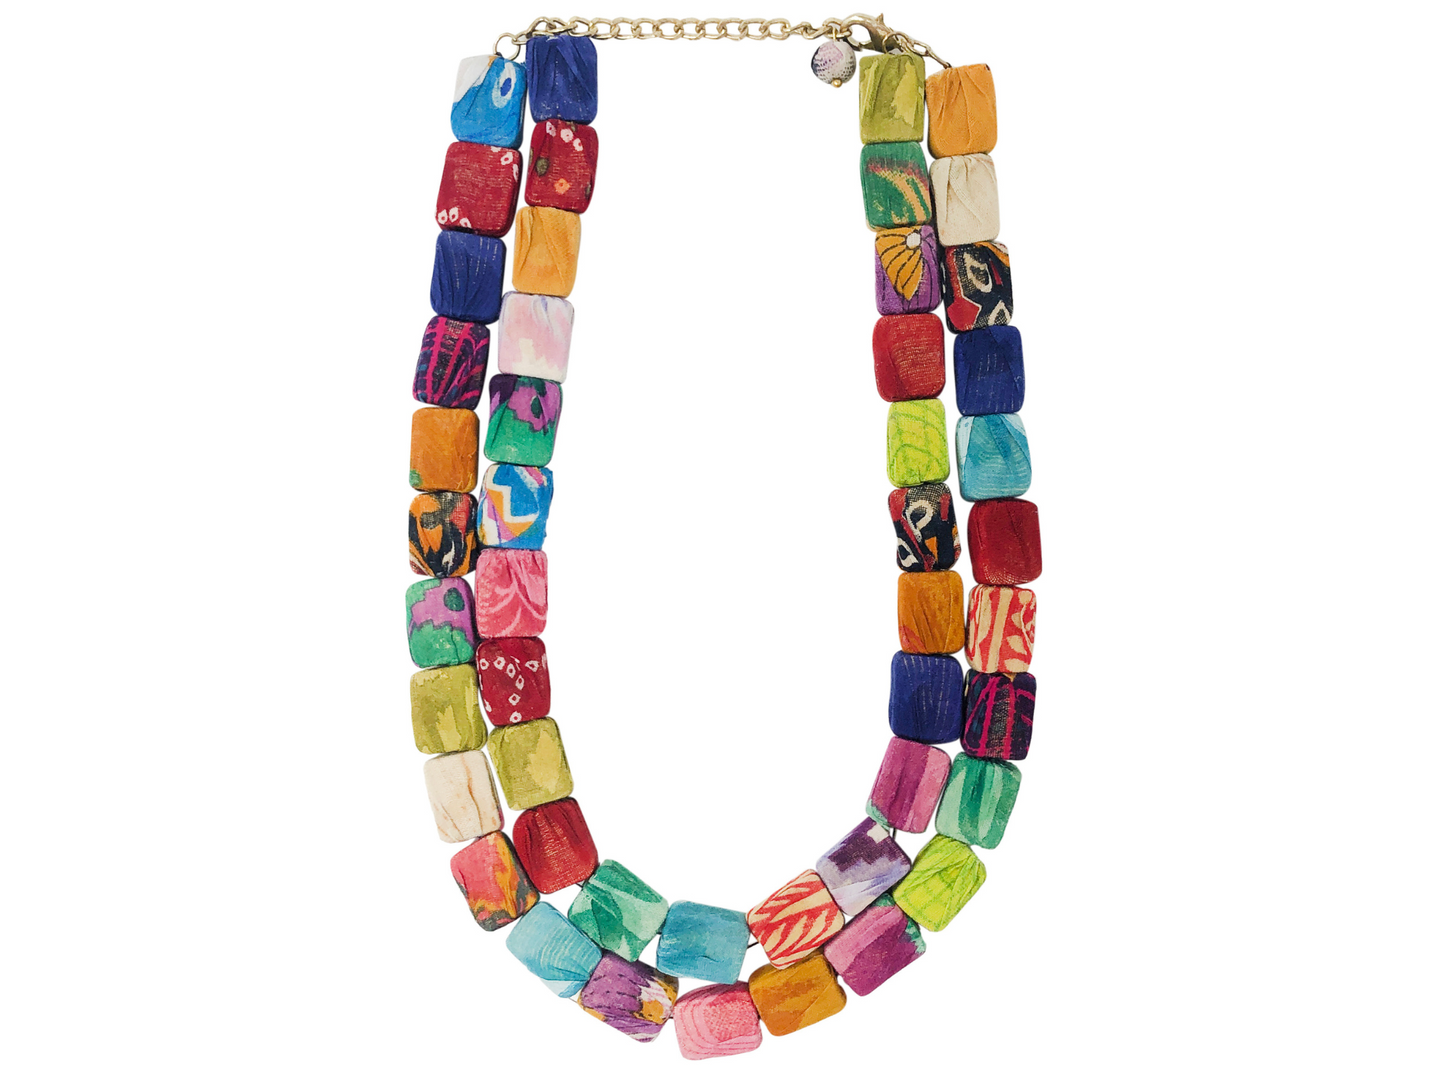 Vintage Kantha Cubic Necklace - KanthaCollection